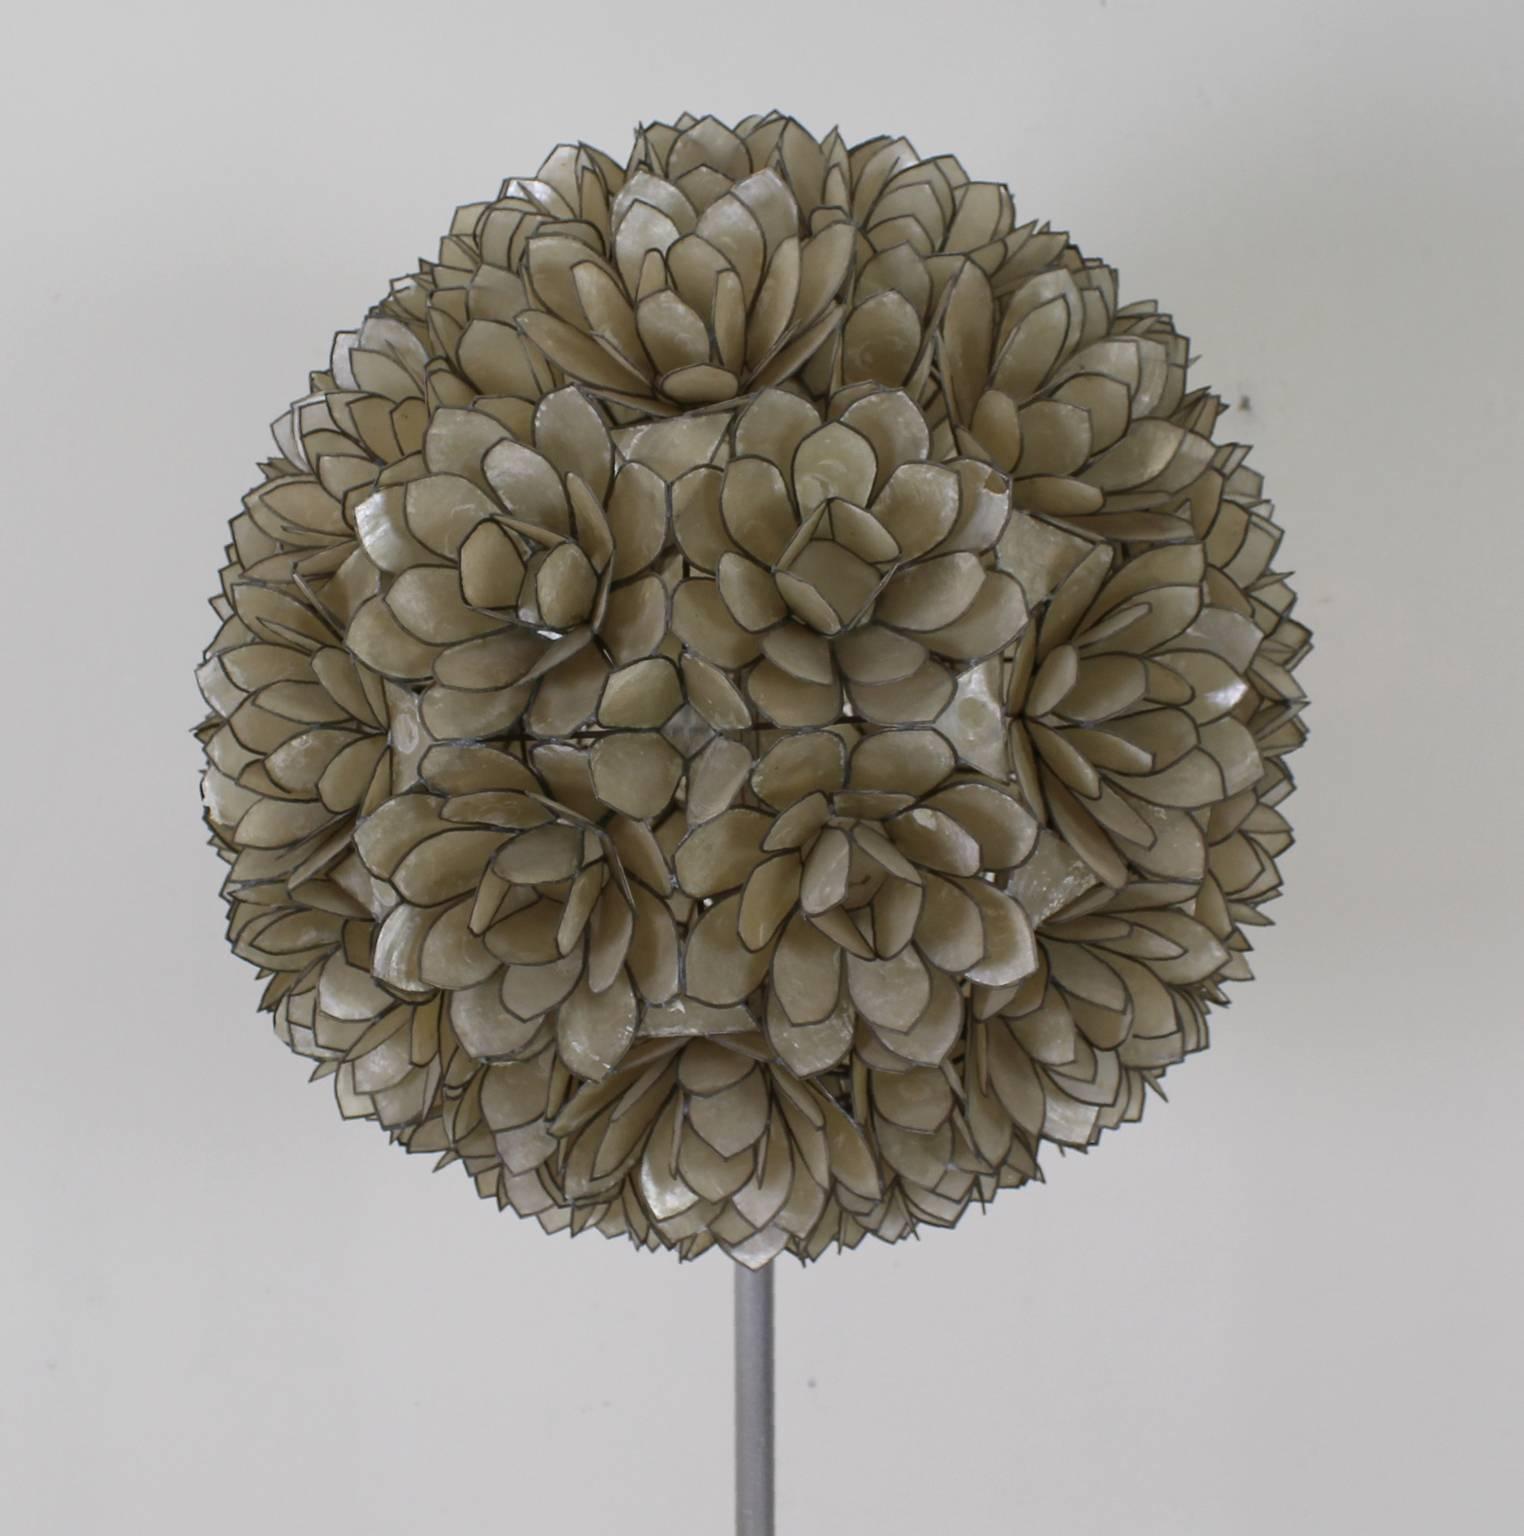 Flower ball mother-of-pearl floor lamp, 1970. 
Lotus floor lamp, shade made of thin pearl leaves 
(a few leaves have some damage).
Supported on a metal upright stem. 
The base is covered with mica. 
Provides a nice atmospheric subtle light.